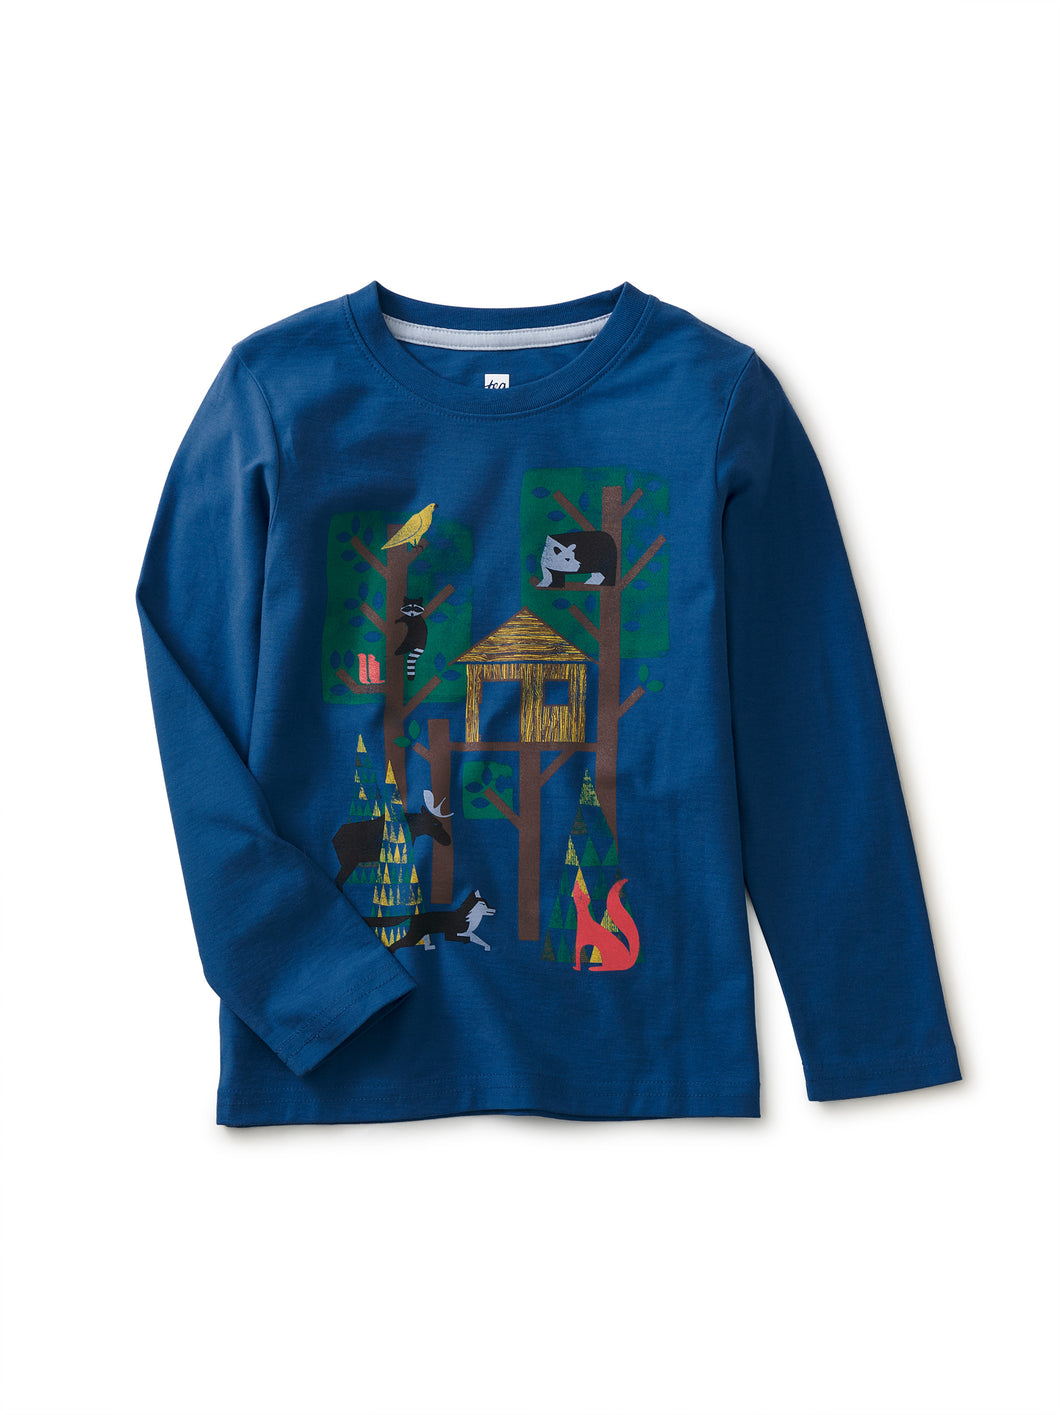 Tea Collection Long Sleeve Graphic Tee - Treehouse